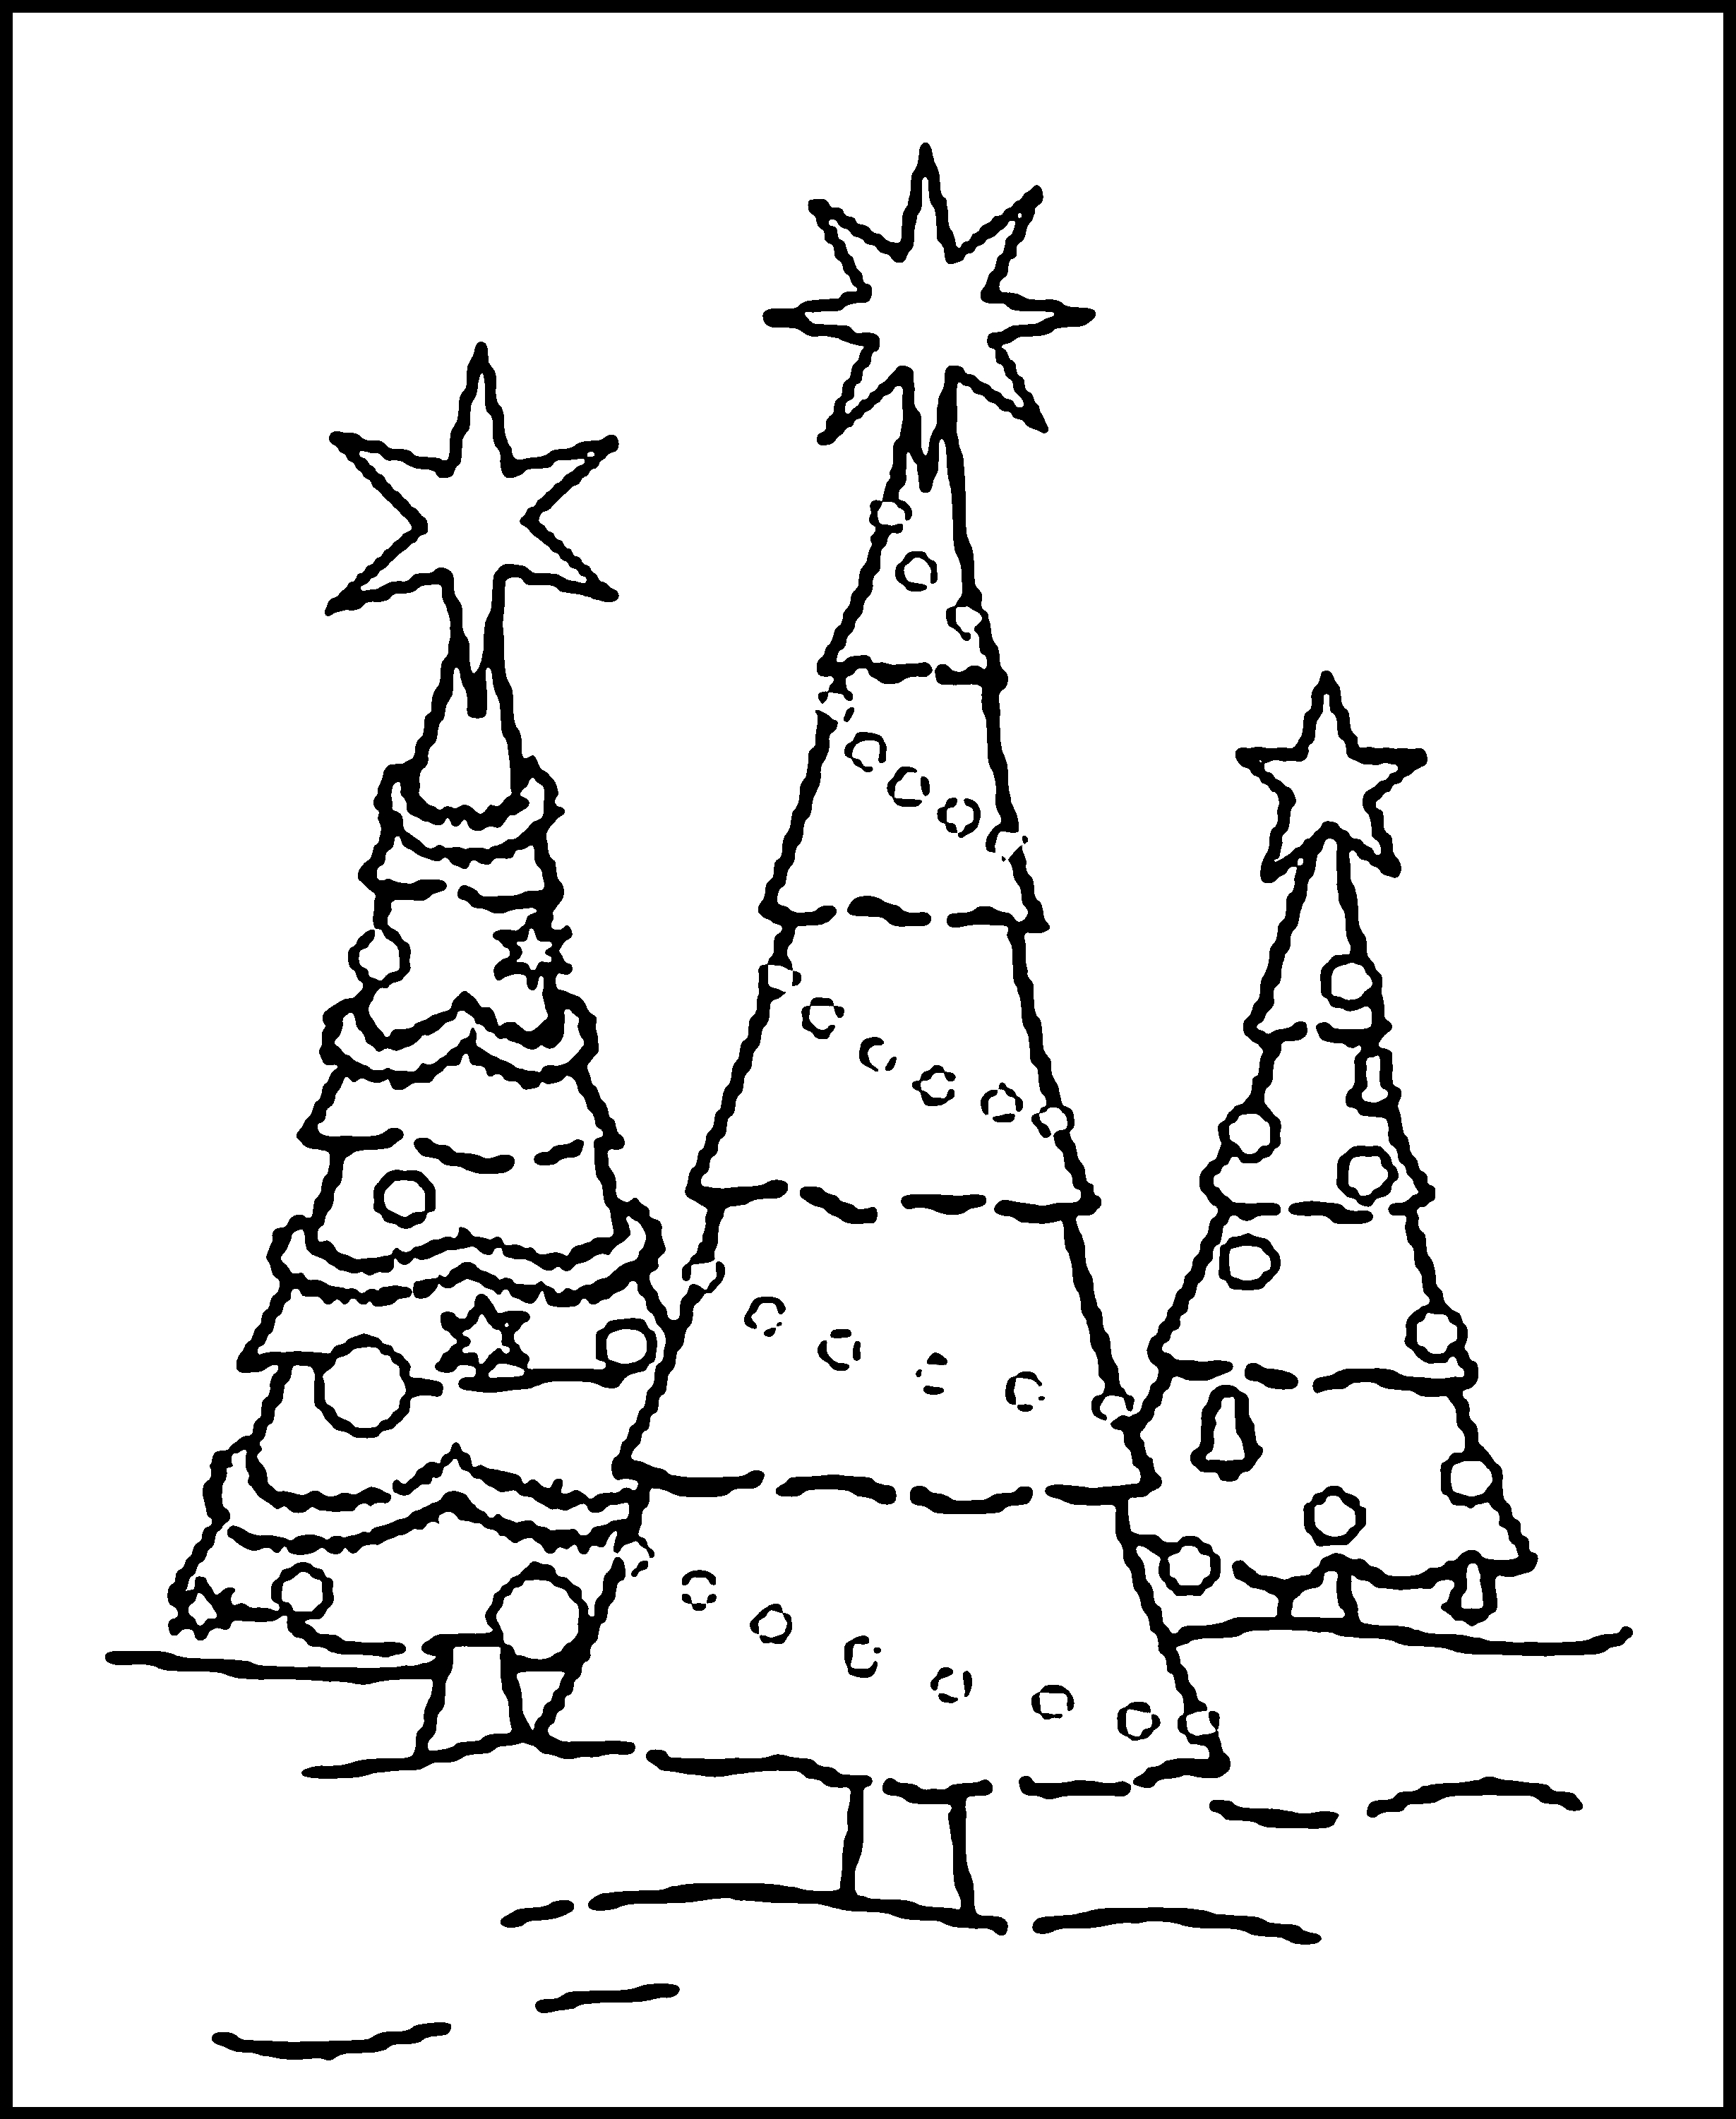 Free Printable Christmas Tree Coloring Pages For Kids - Free Printable Christmas Tree Images